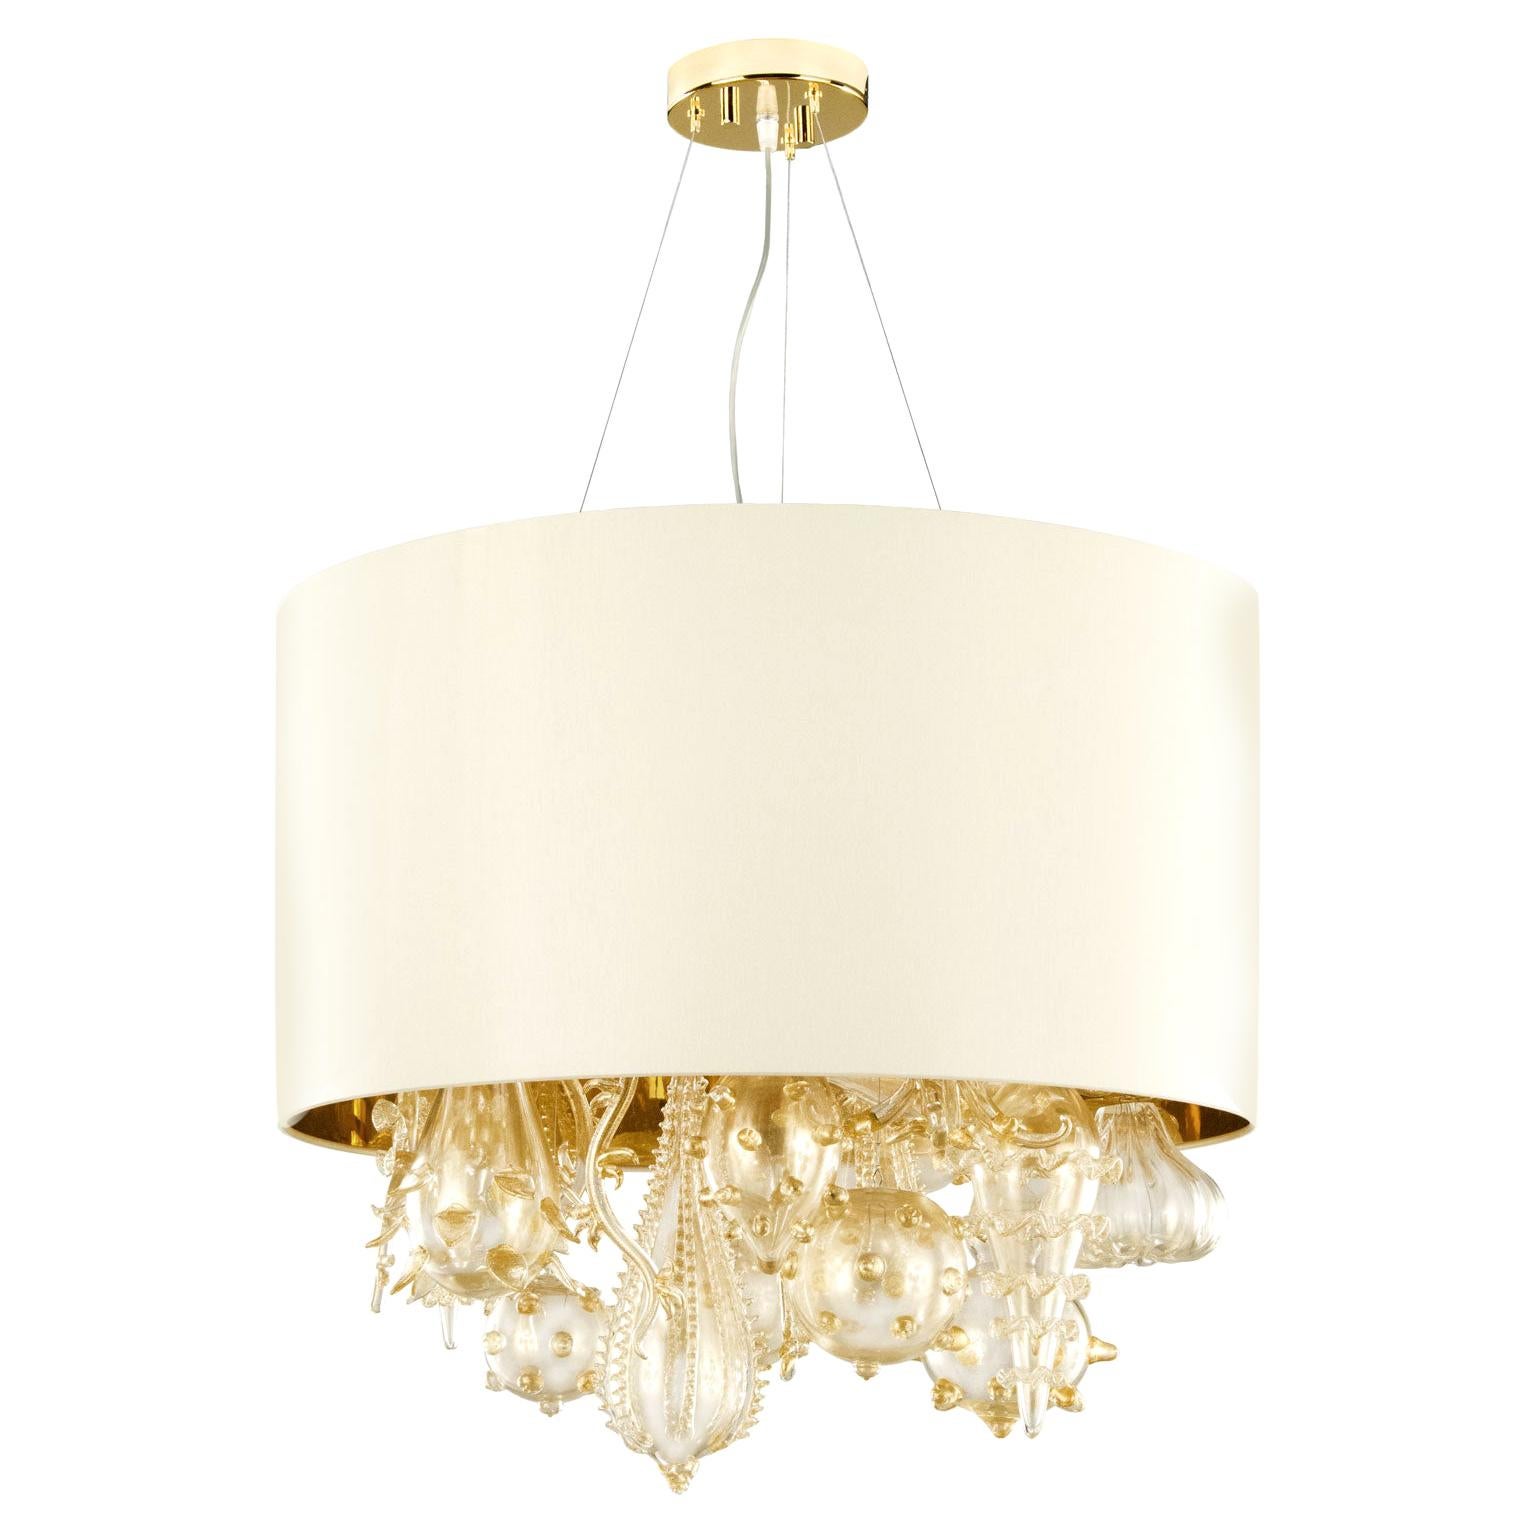 Artistic Suspension Lamp Gold leaf Glass elements, Ivory Lampshade by Multiforme For Sale